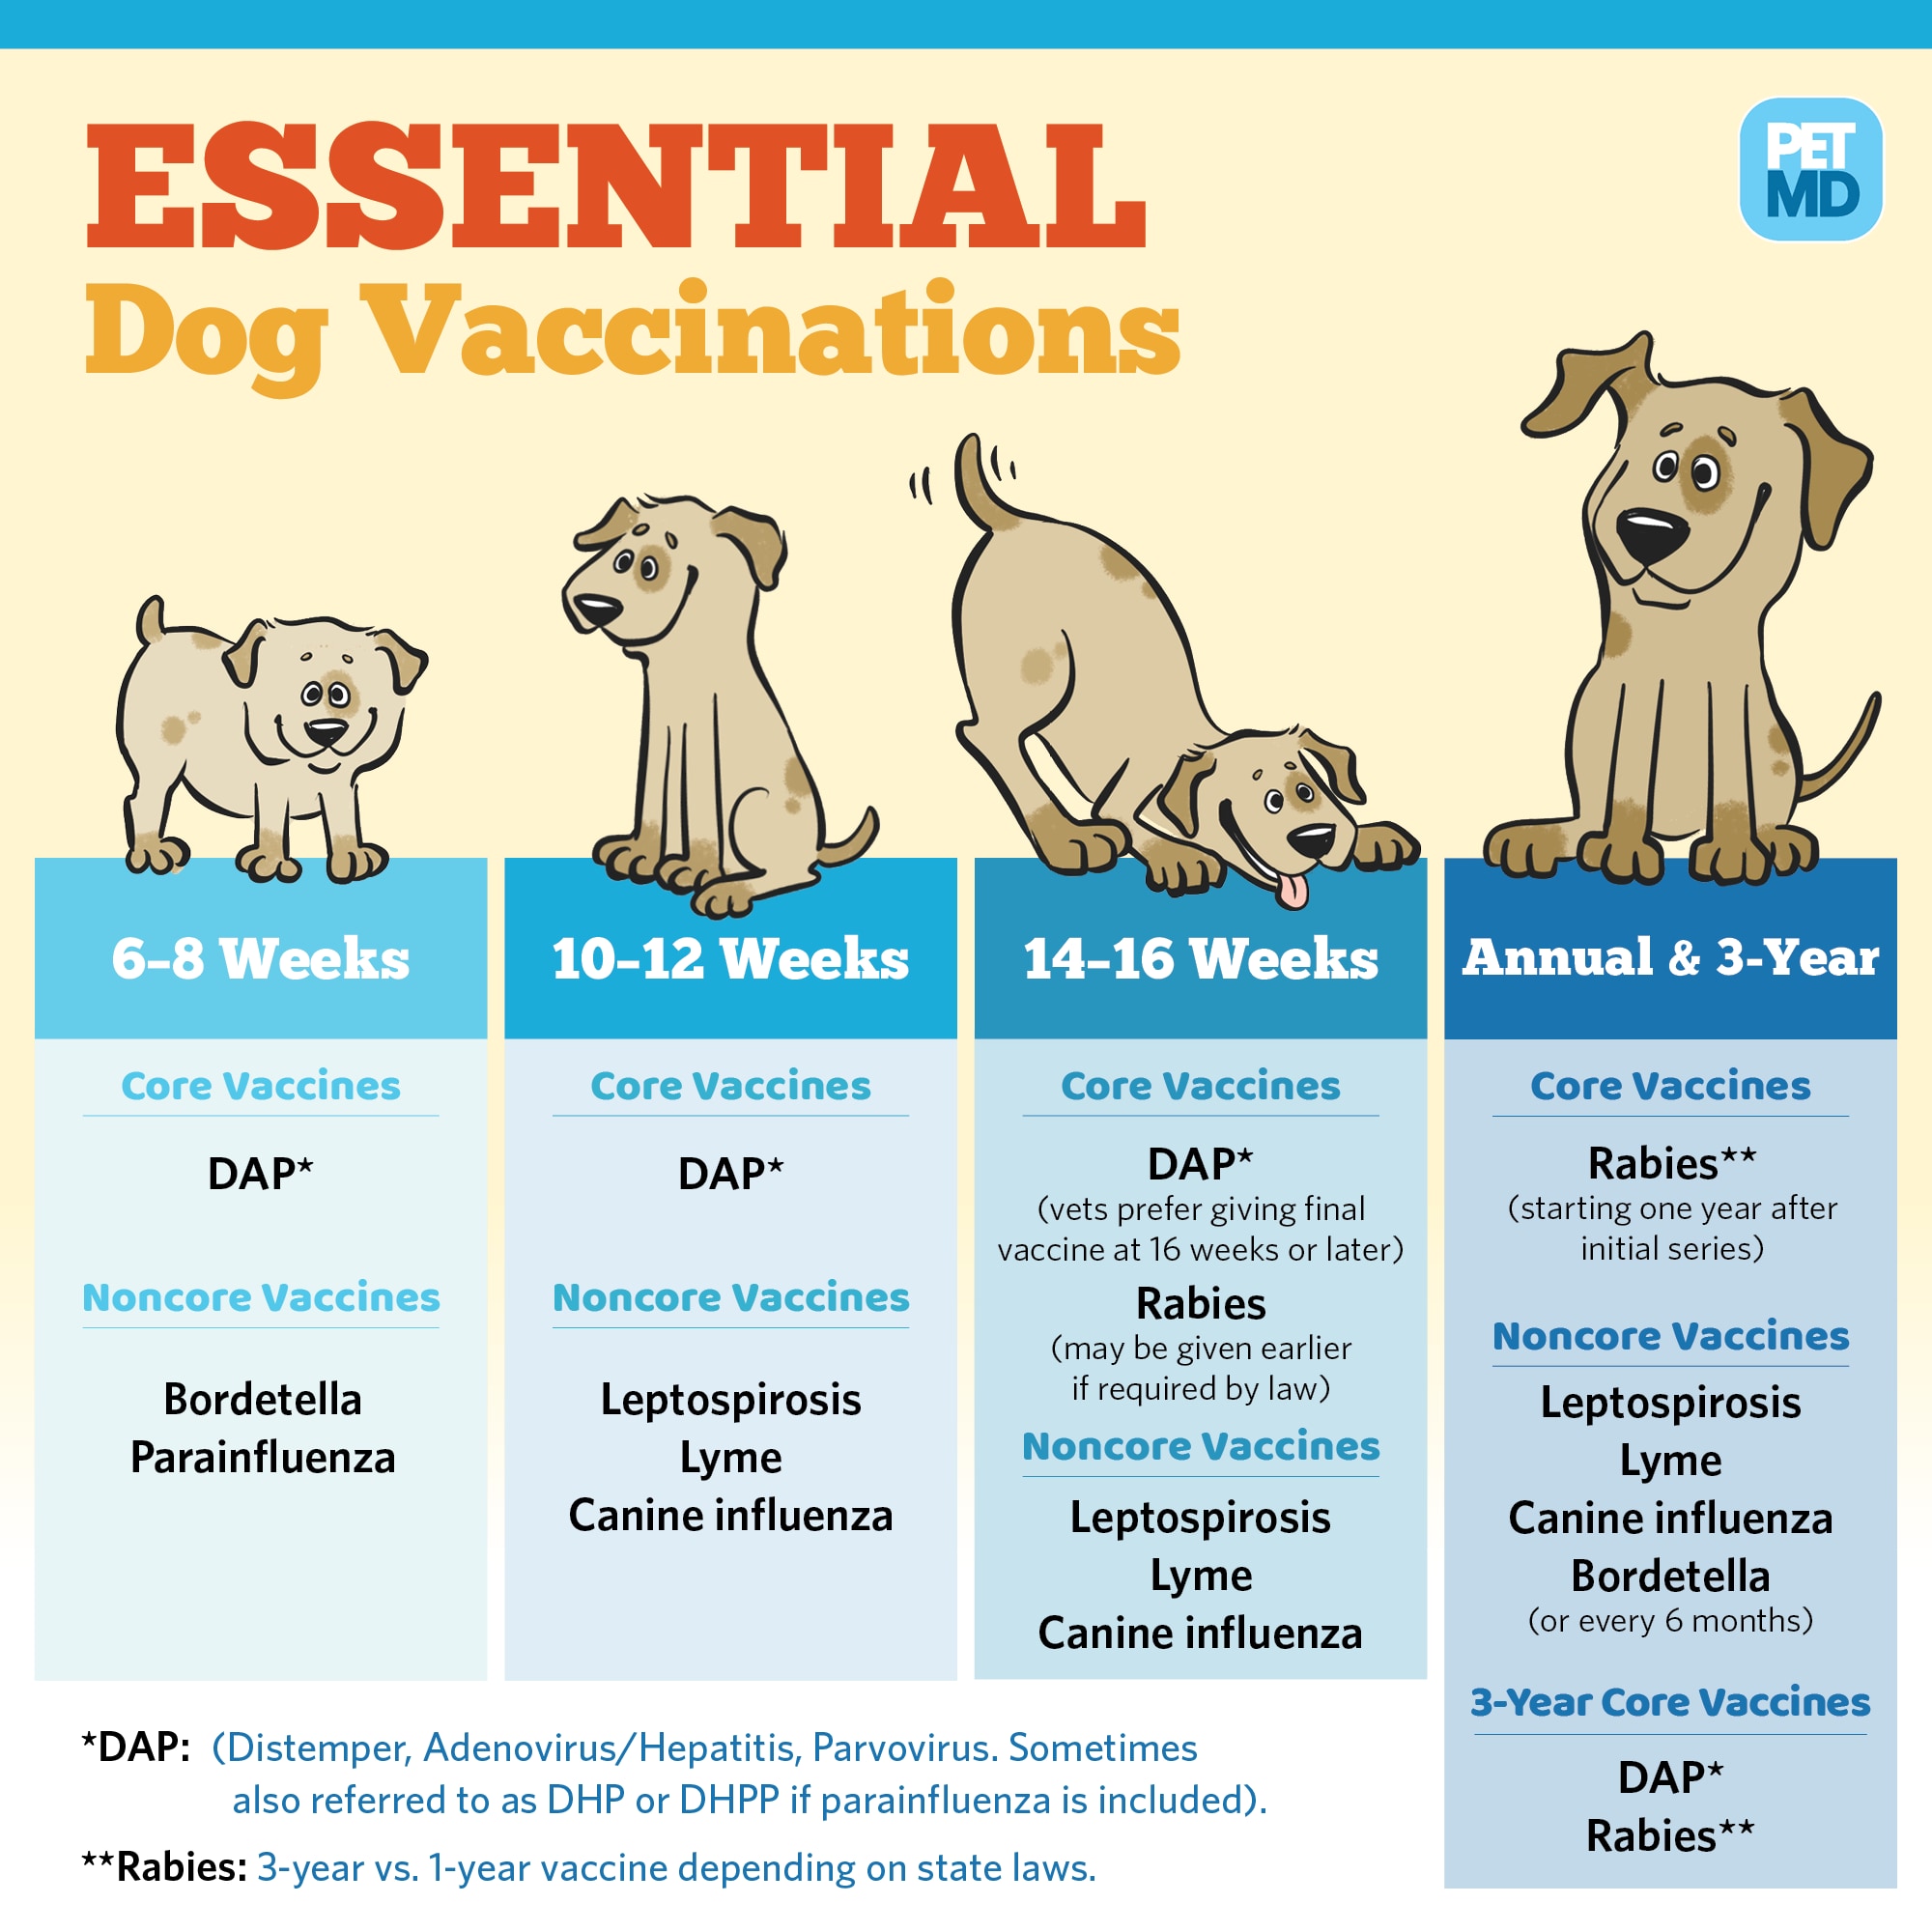 Dog Vaccinations: A Schedule for Every Life Stage